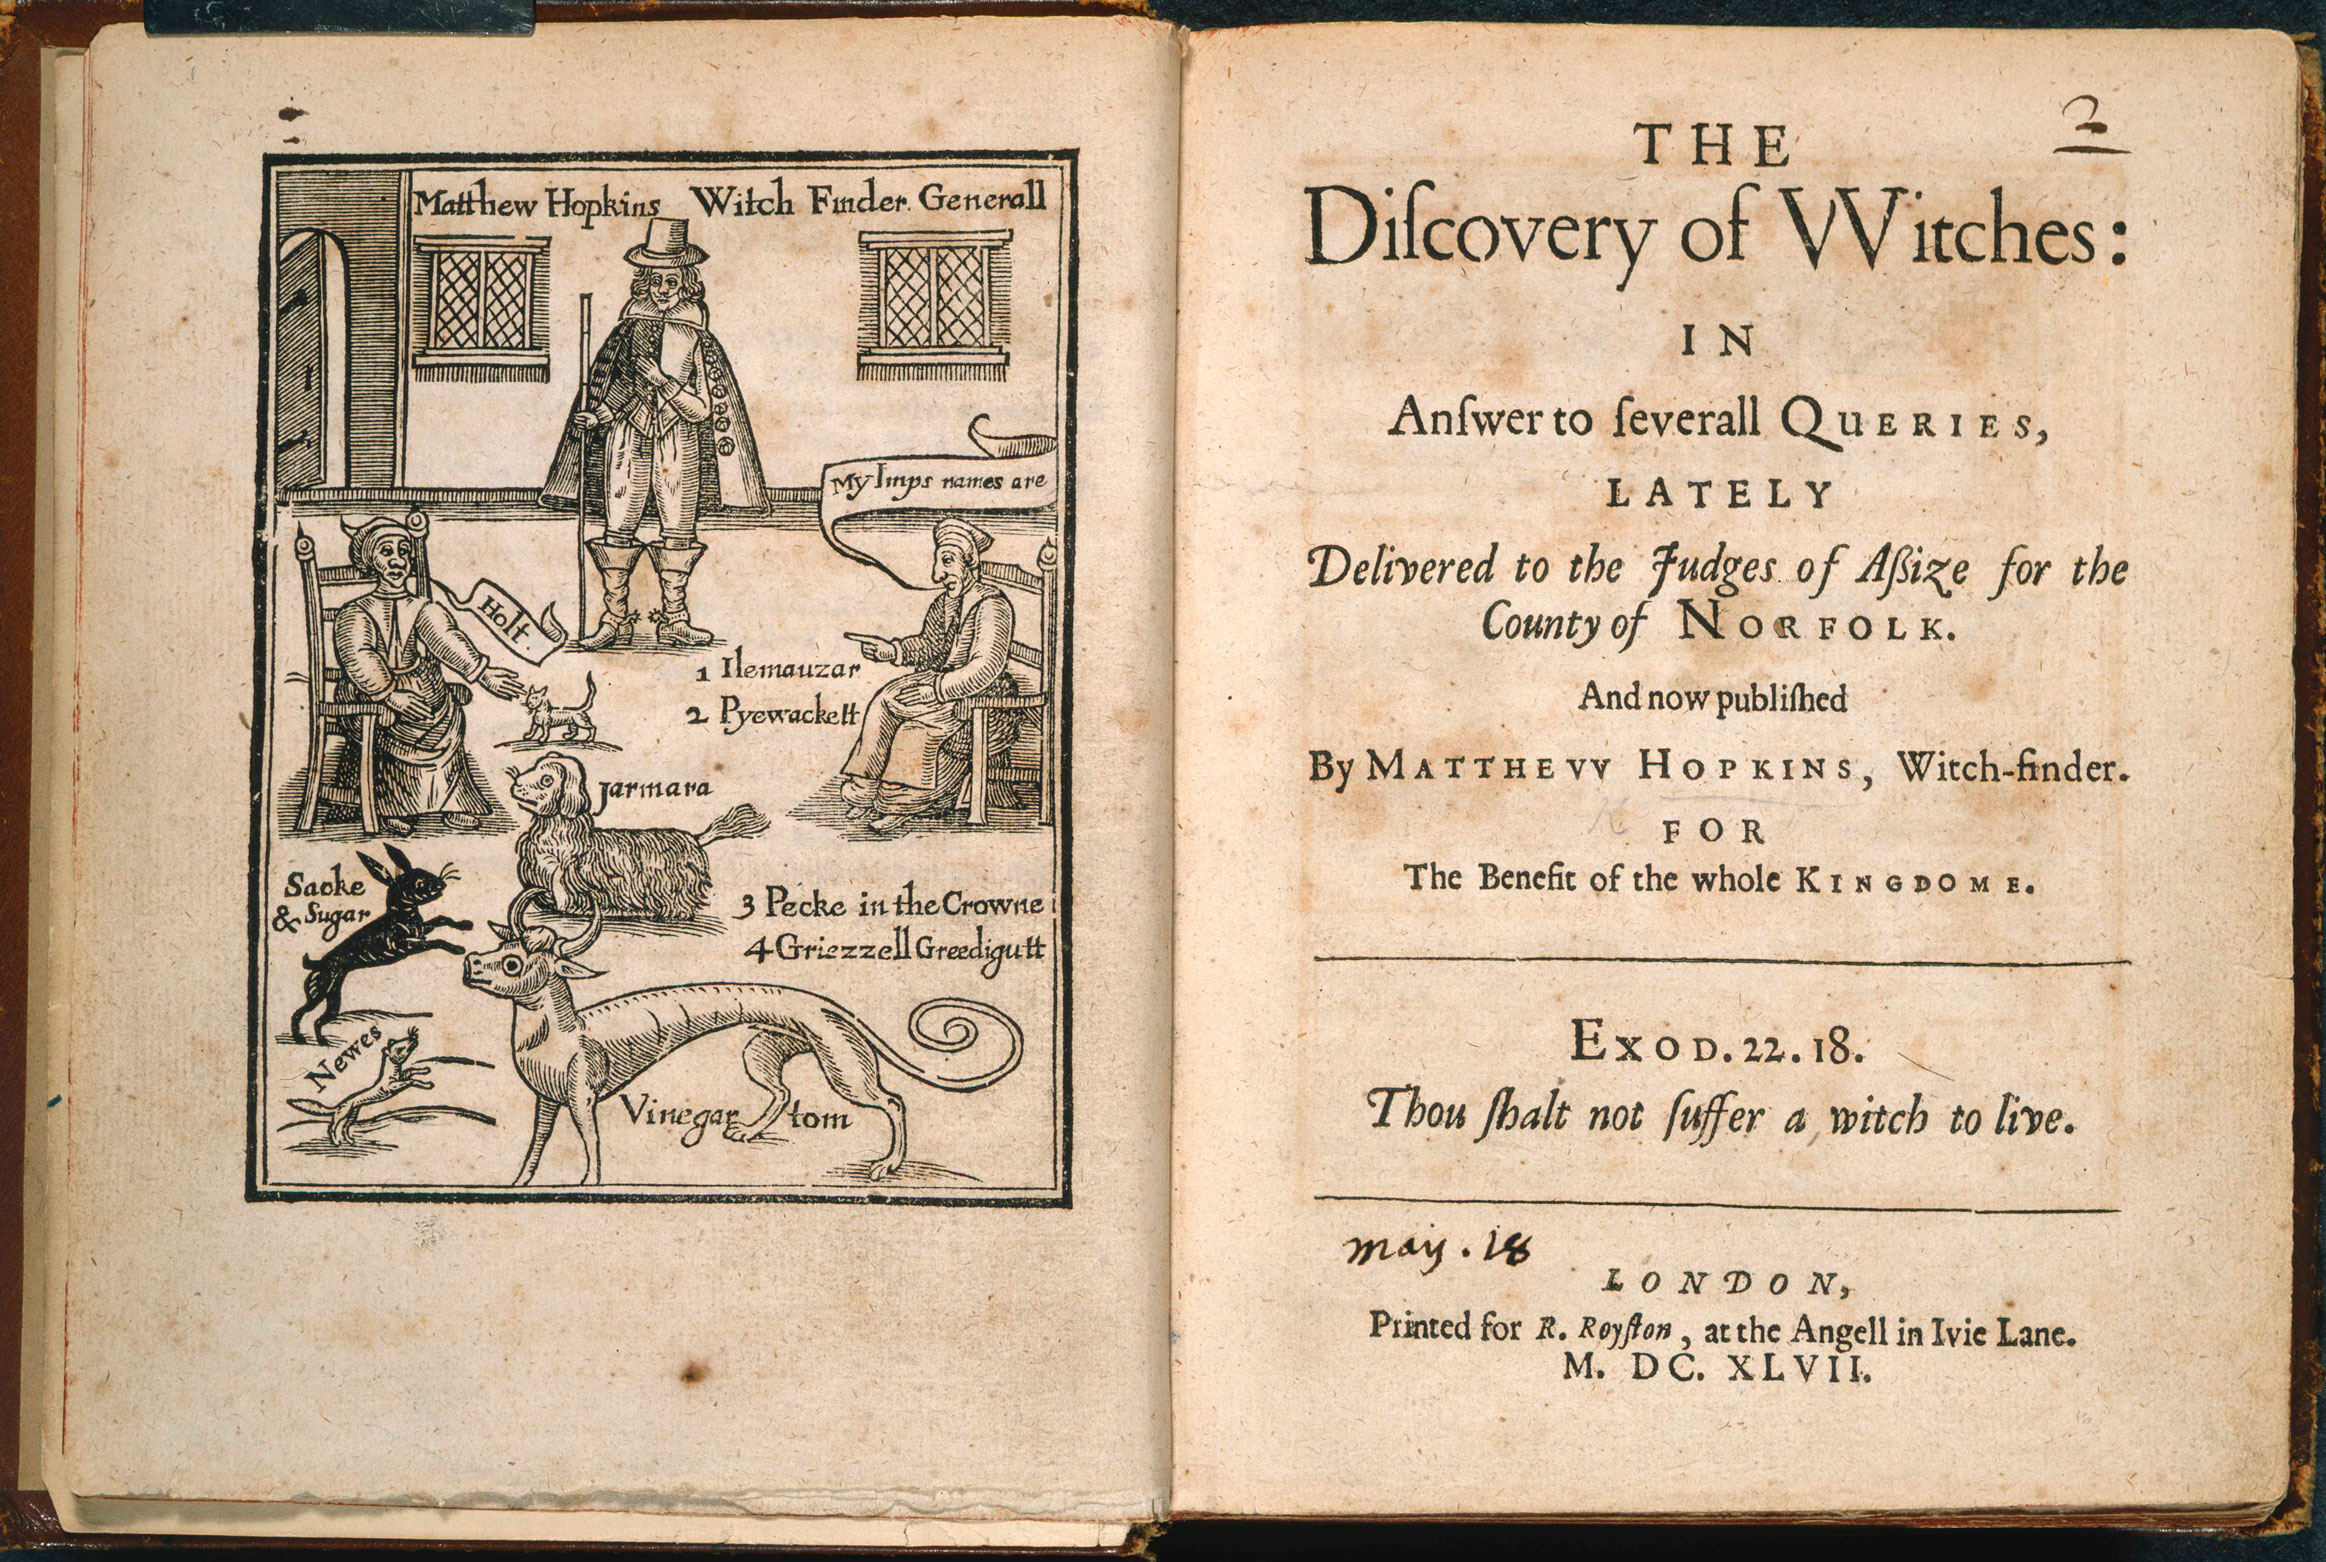 First page of book with illustration of a man standing in a room next to two seated women. The women are surrounded by animals: a cat, a dog, a black hare, a cow with paws, and a ferret.